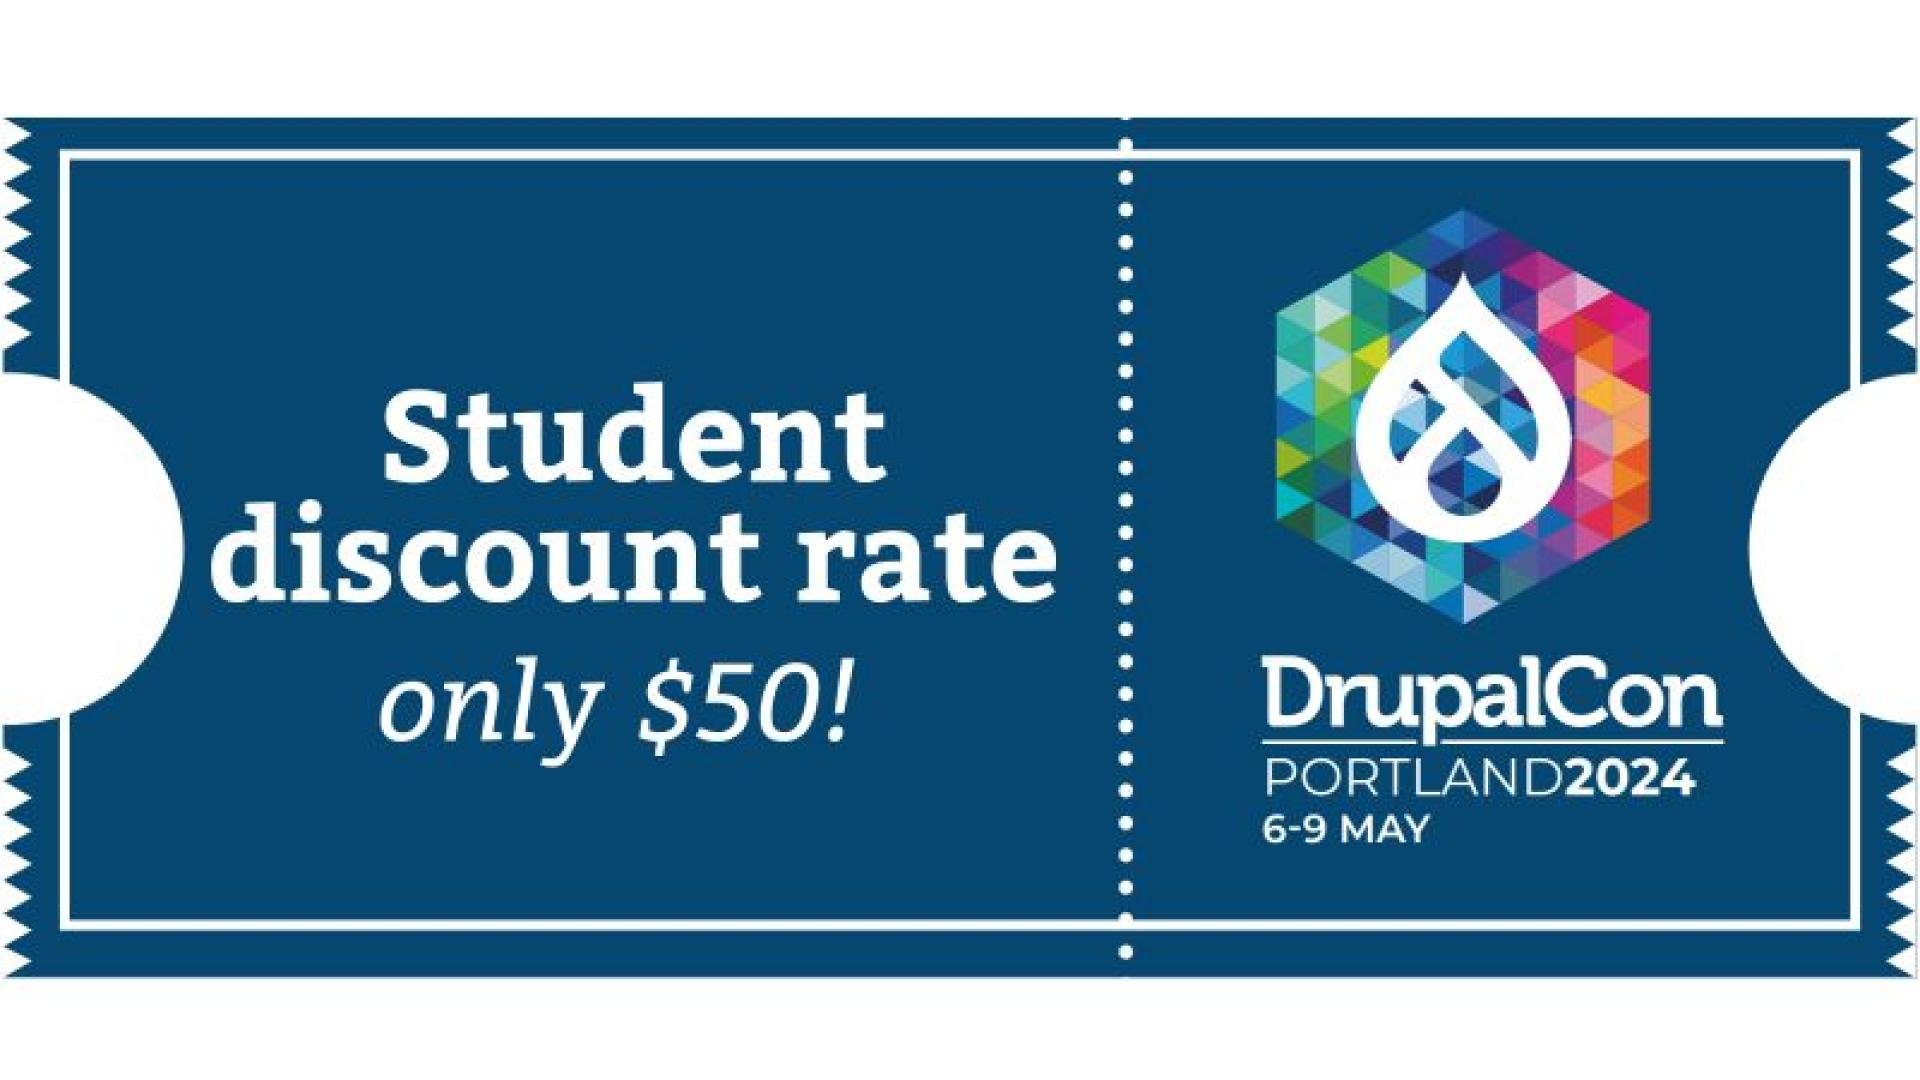 Student discount for DrupalCon Portland